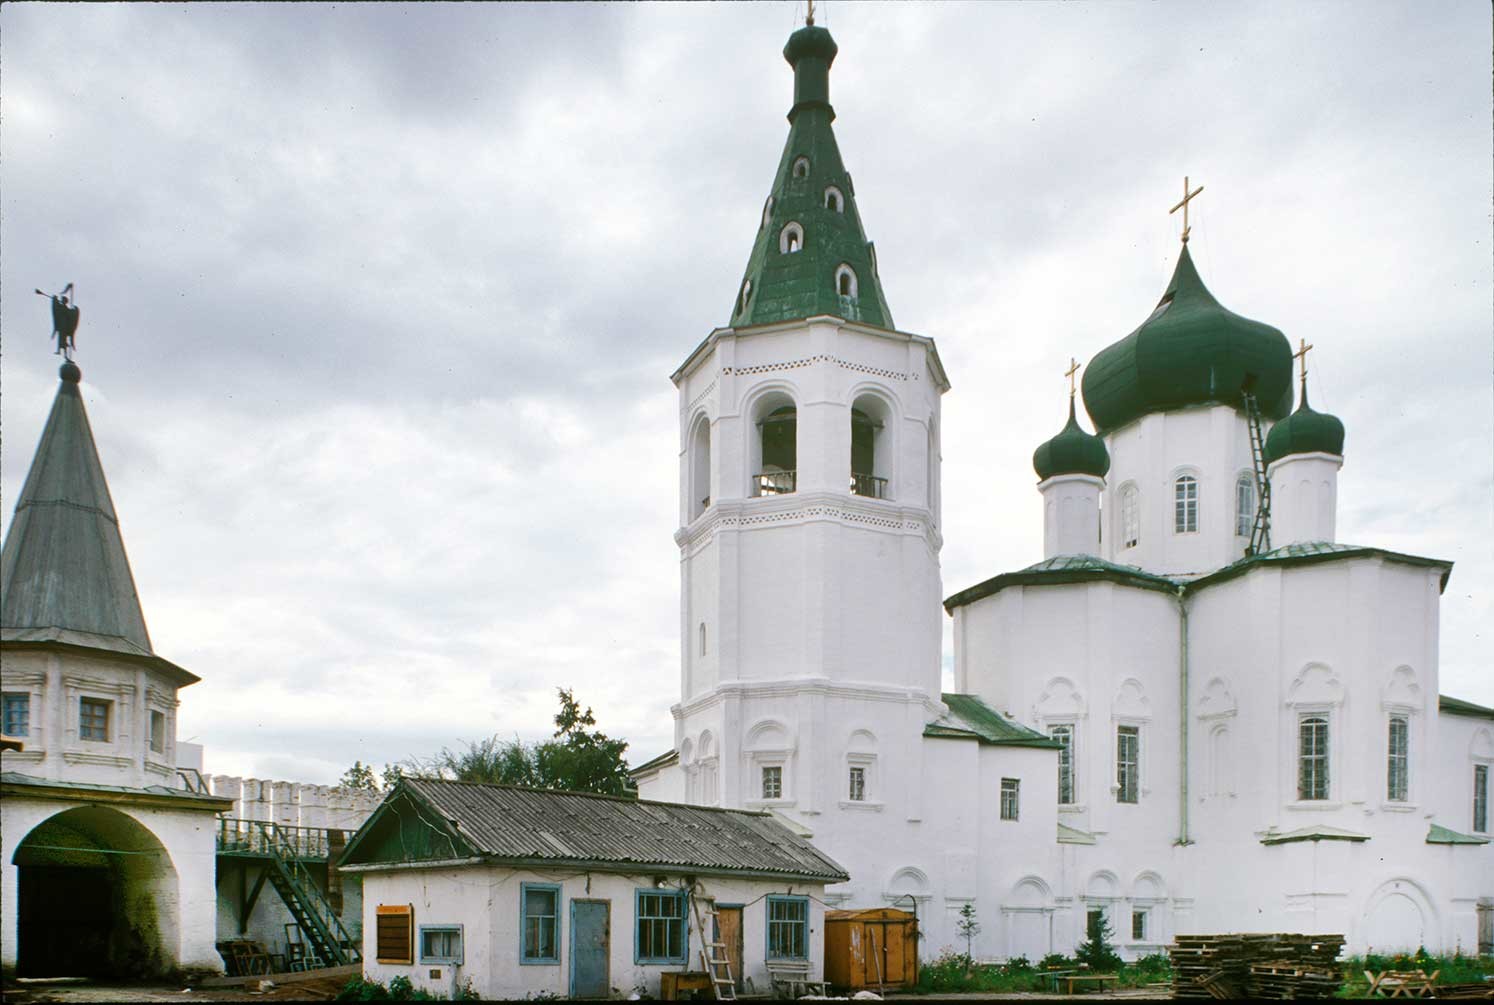 Trinity Monastery. South gate, bell tower, Church of Sts. Peter and Paul. Northeast view. Photo: William Brumfield. Aug. 29, 1999.